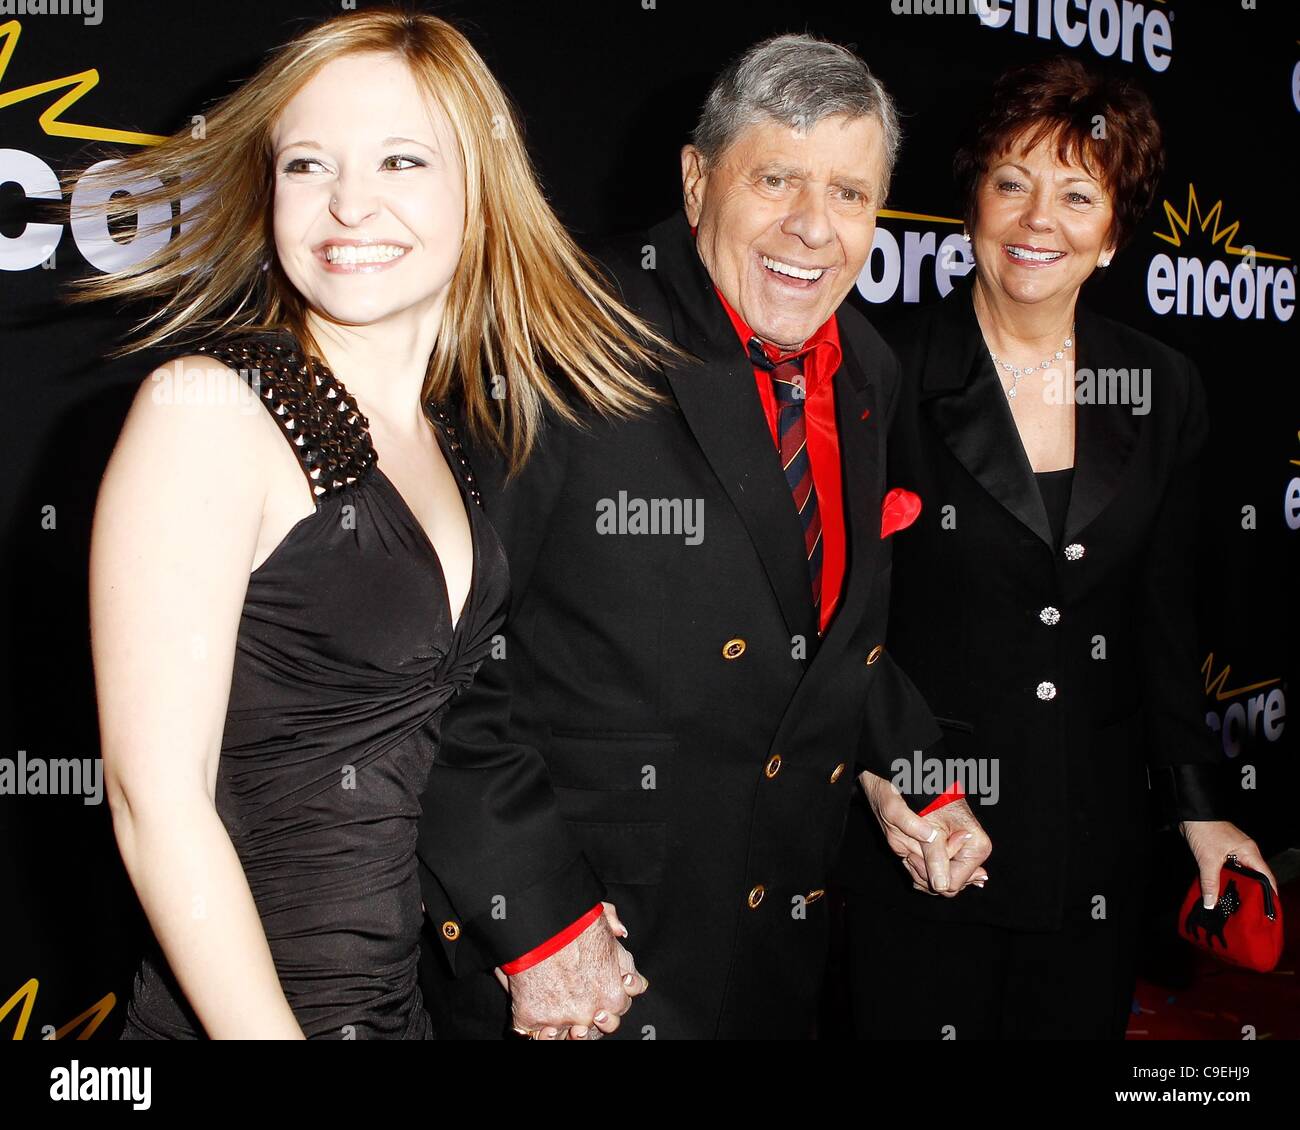 Danielle Sarah Lewis, Jerry Lewis, SanDee Pitnick at arrivals for Method to the Madness of Jerry Lewis Premiere on ENCORE Originals, The Paramount Theater, Los Angeles, CA December 7, 2011. Photo By: Craig Bennett/Everett Collection Stock Photo